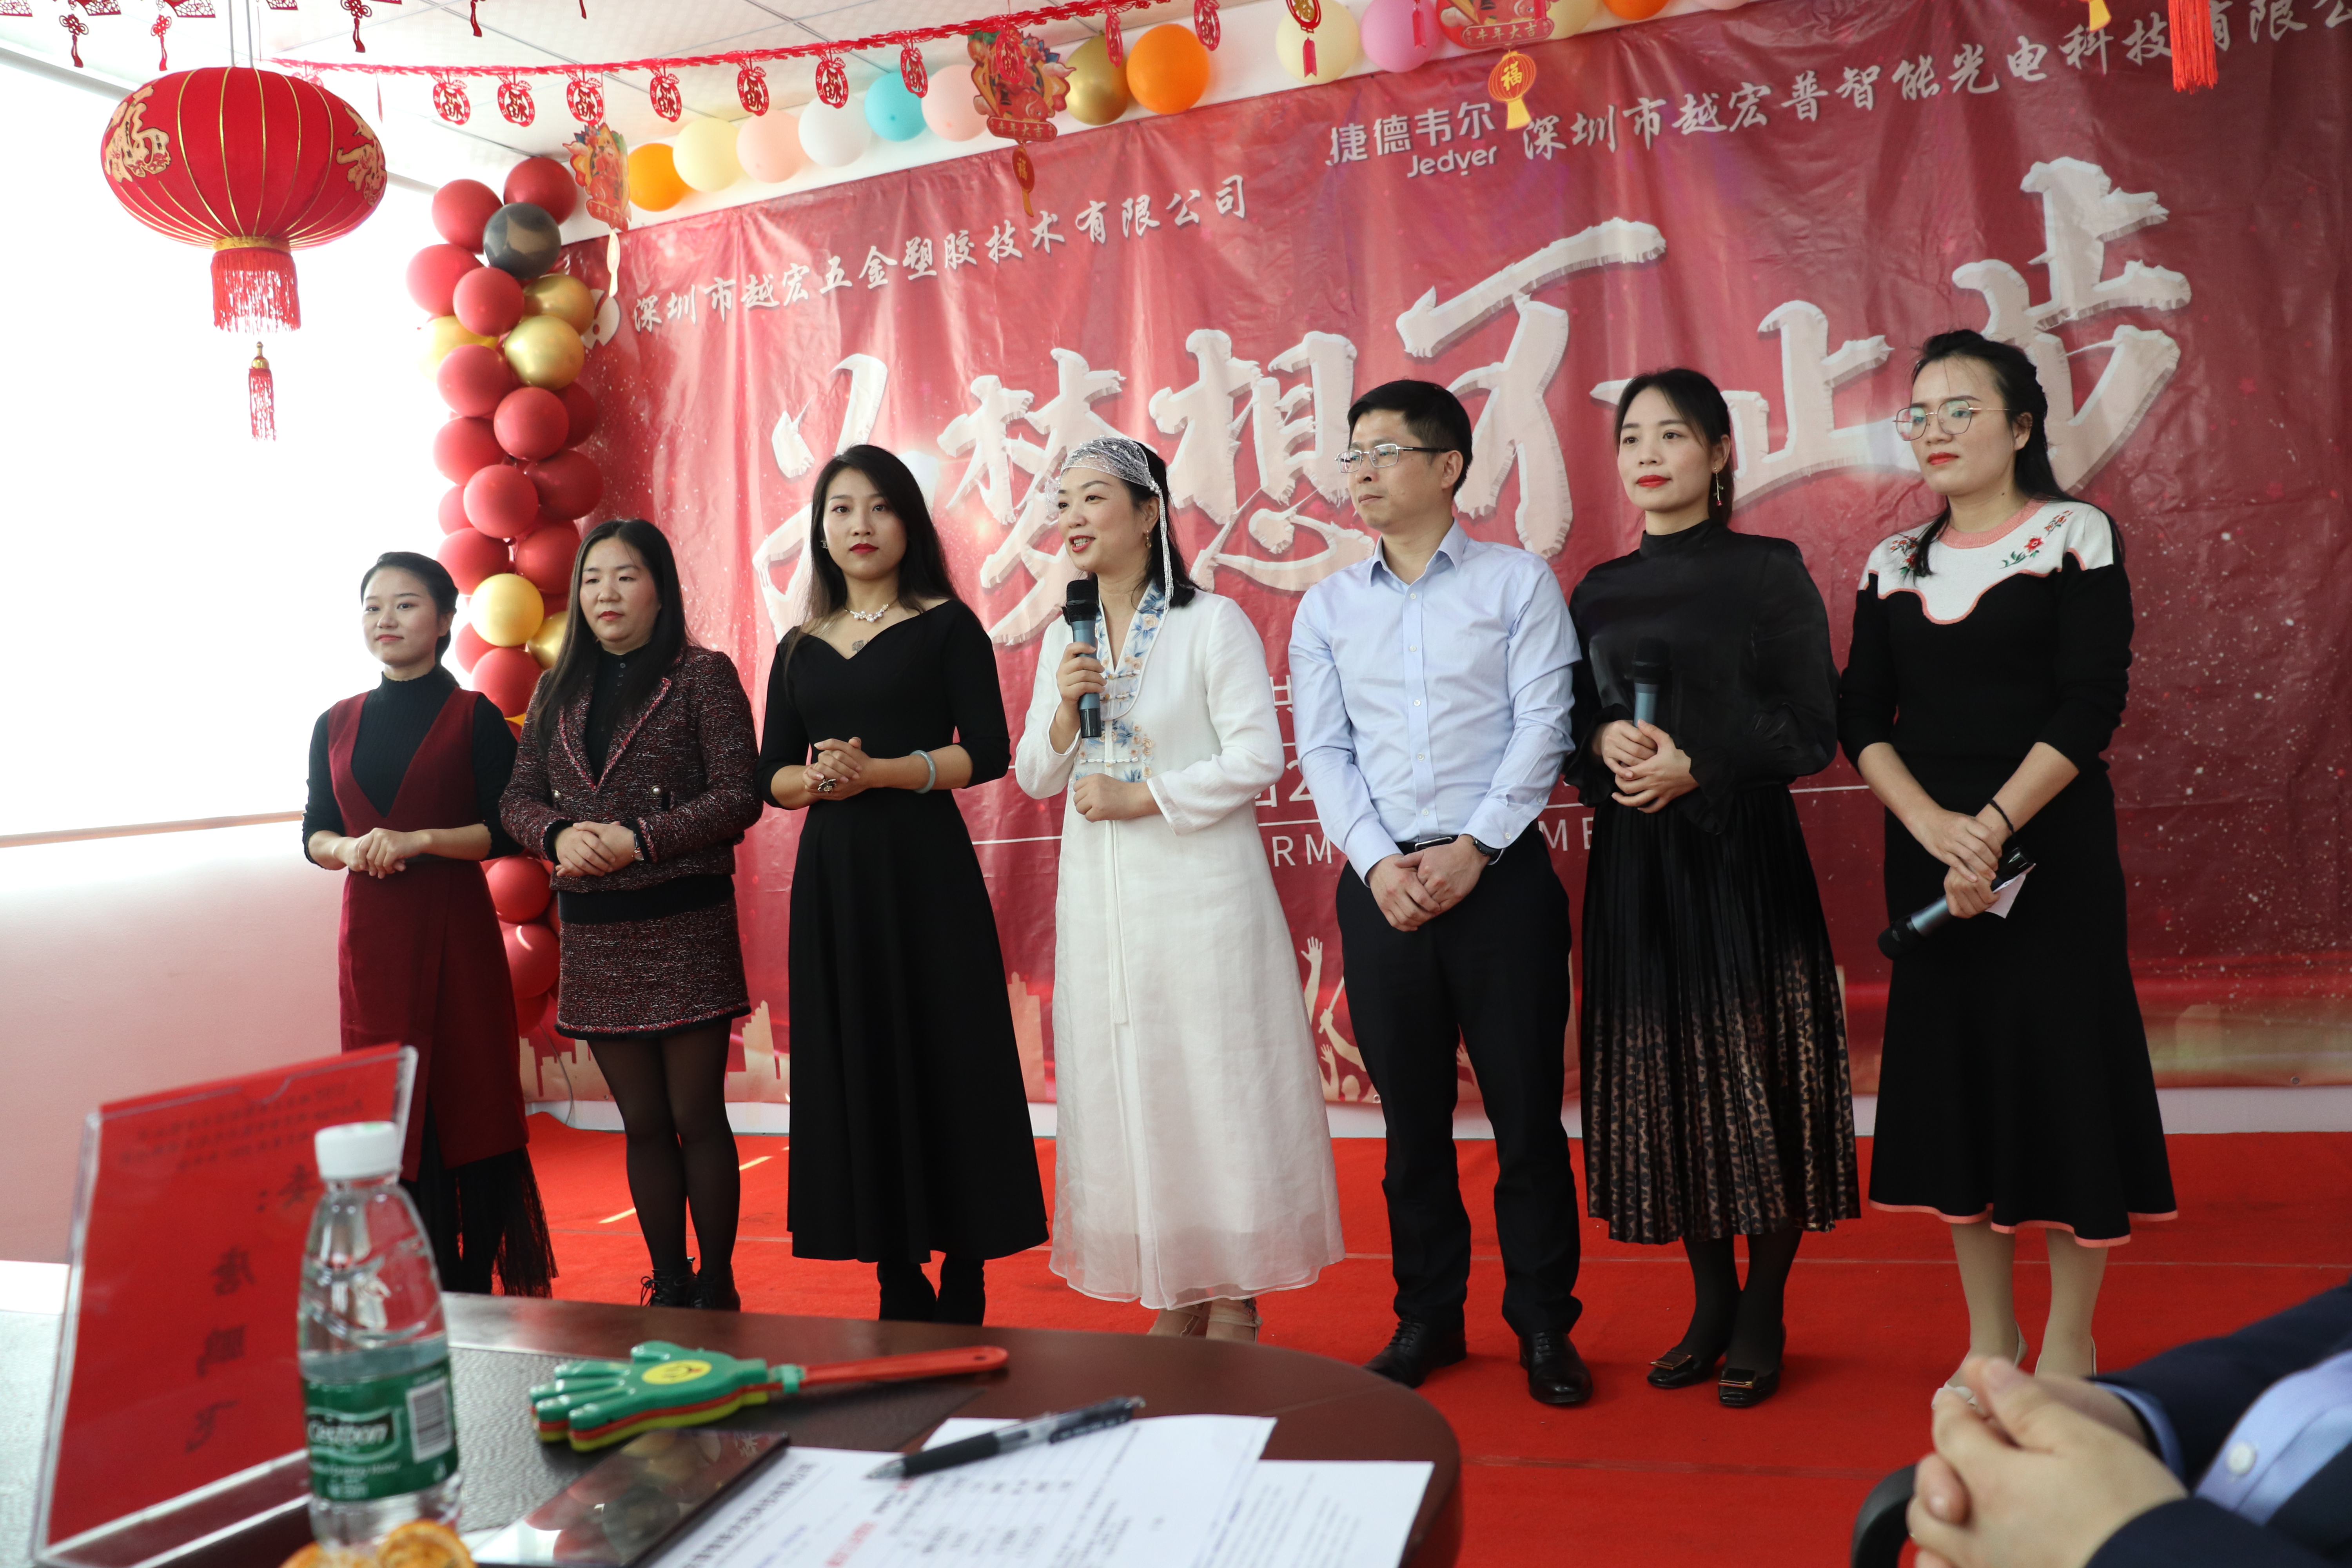 Do not stop for dreams|Yuehong Group "Yun Annual Meeting" was a complete success